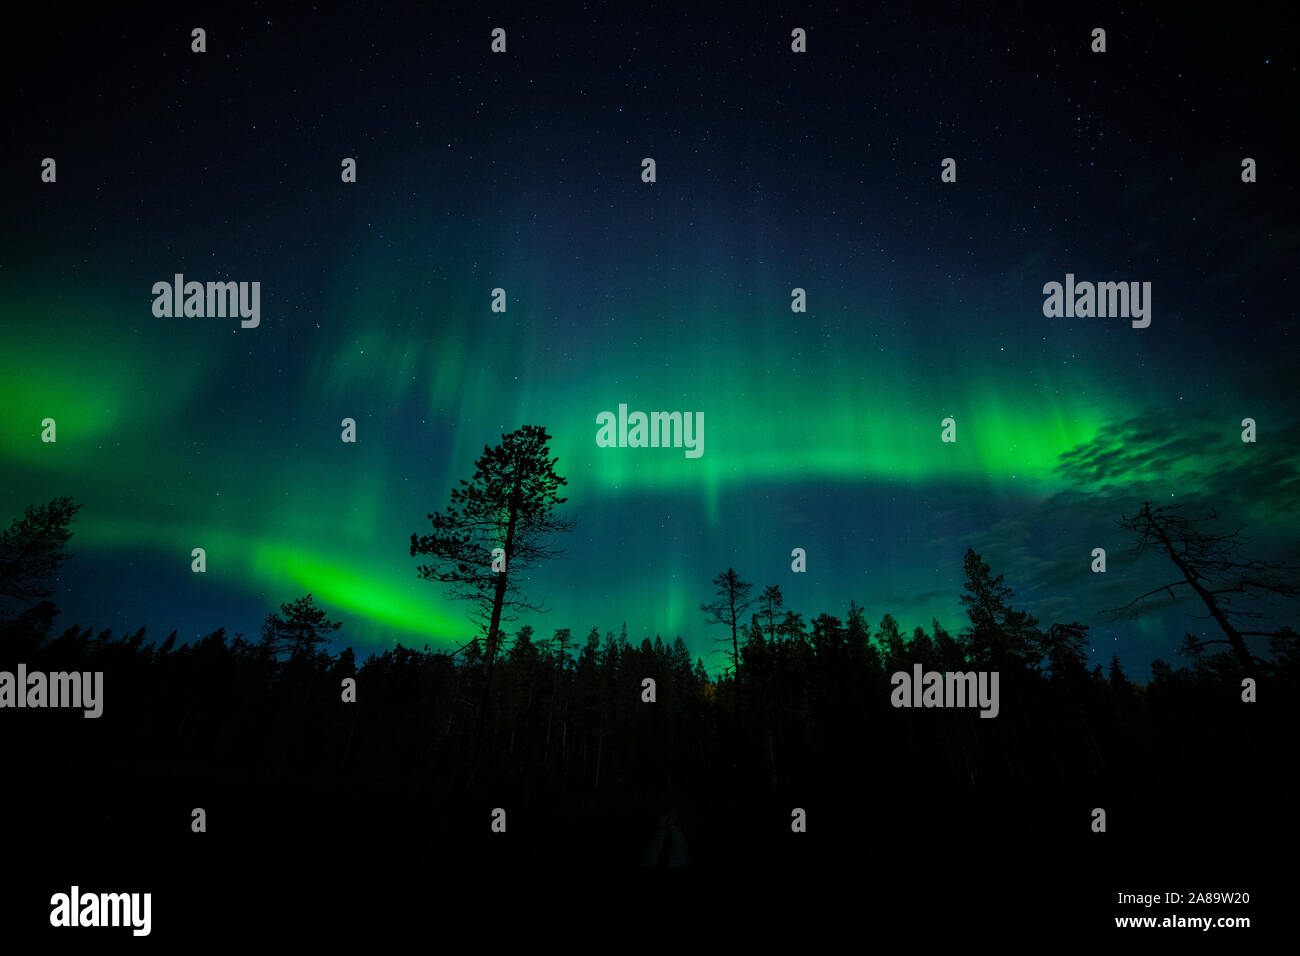 Northern lights in Akaslompolo, Lapland, Finland Stock Photo